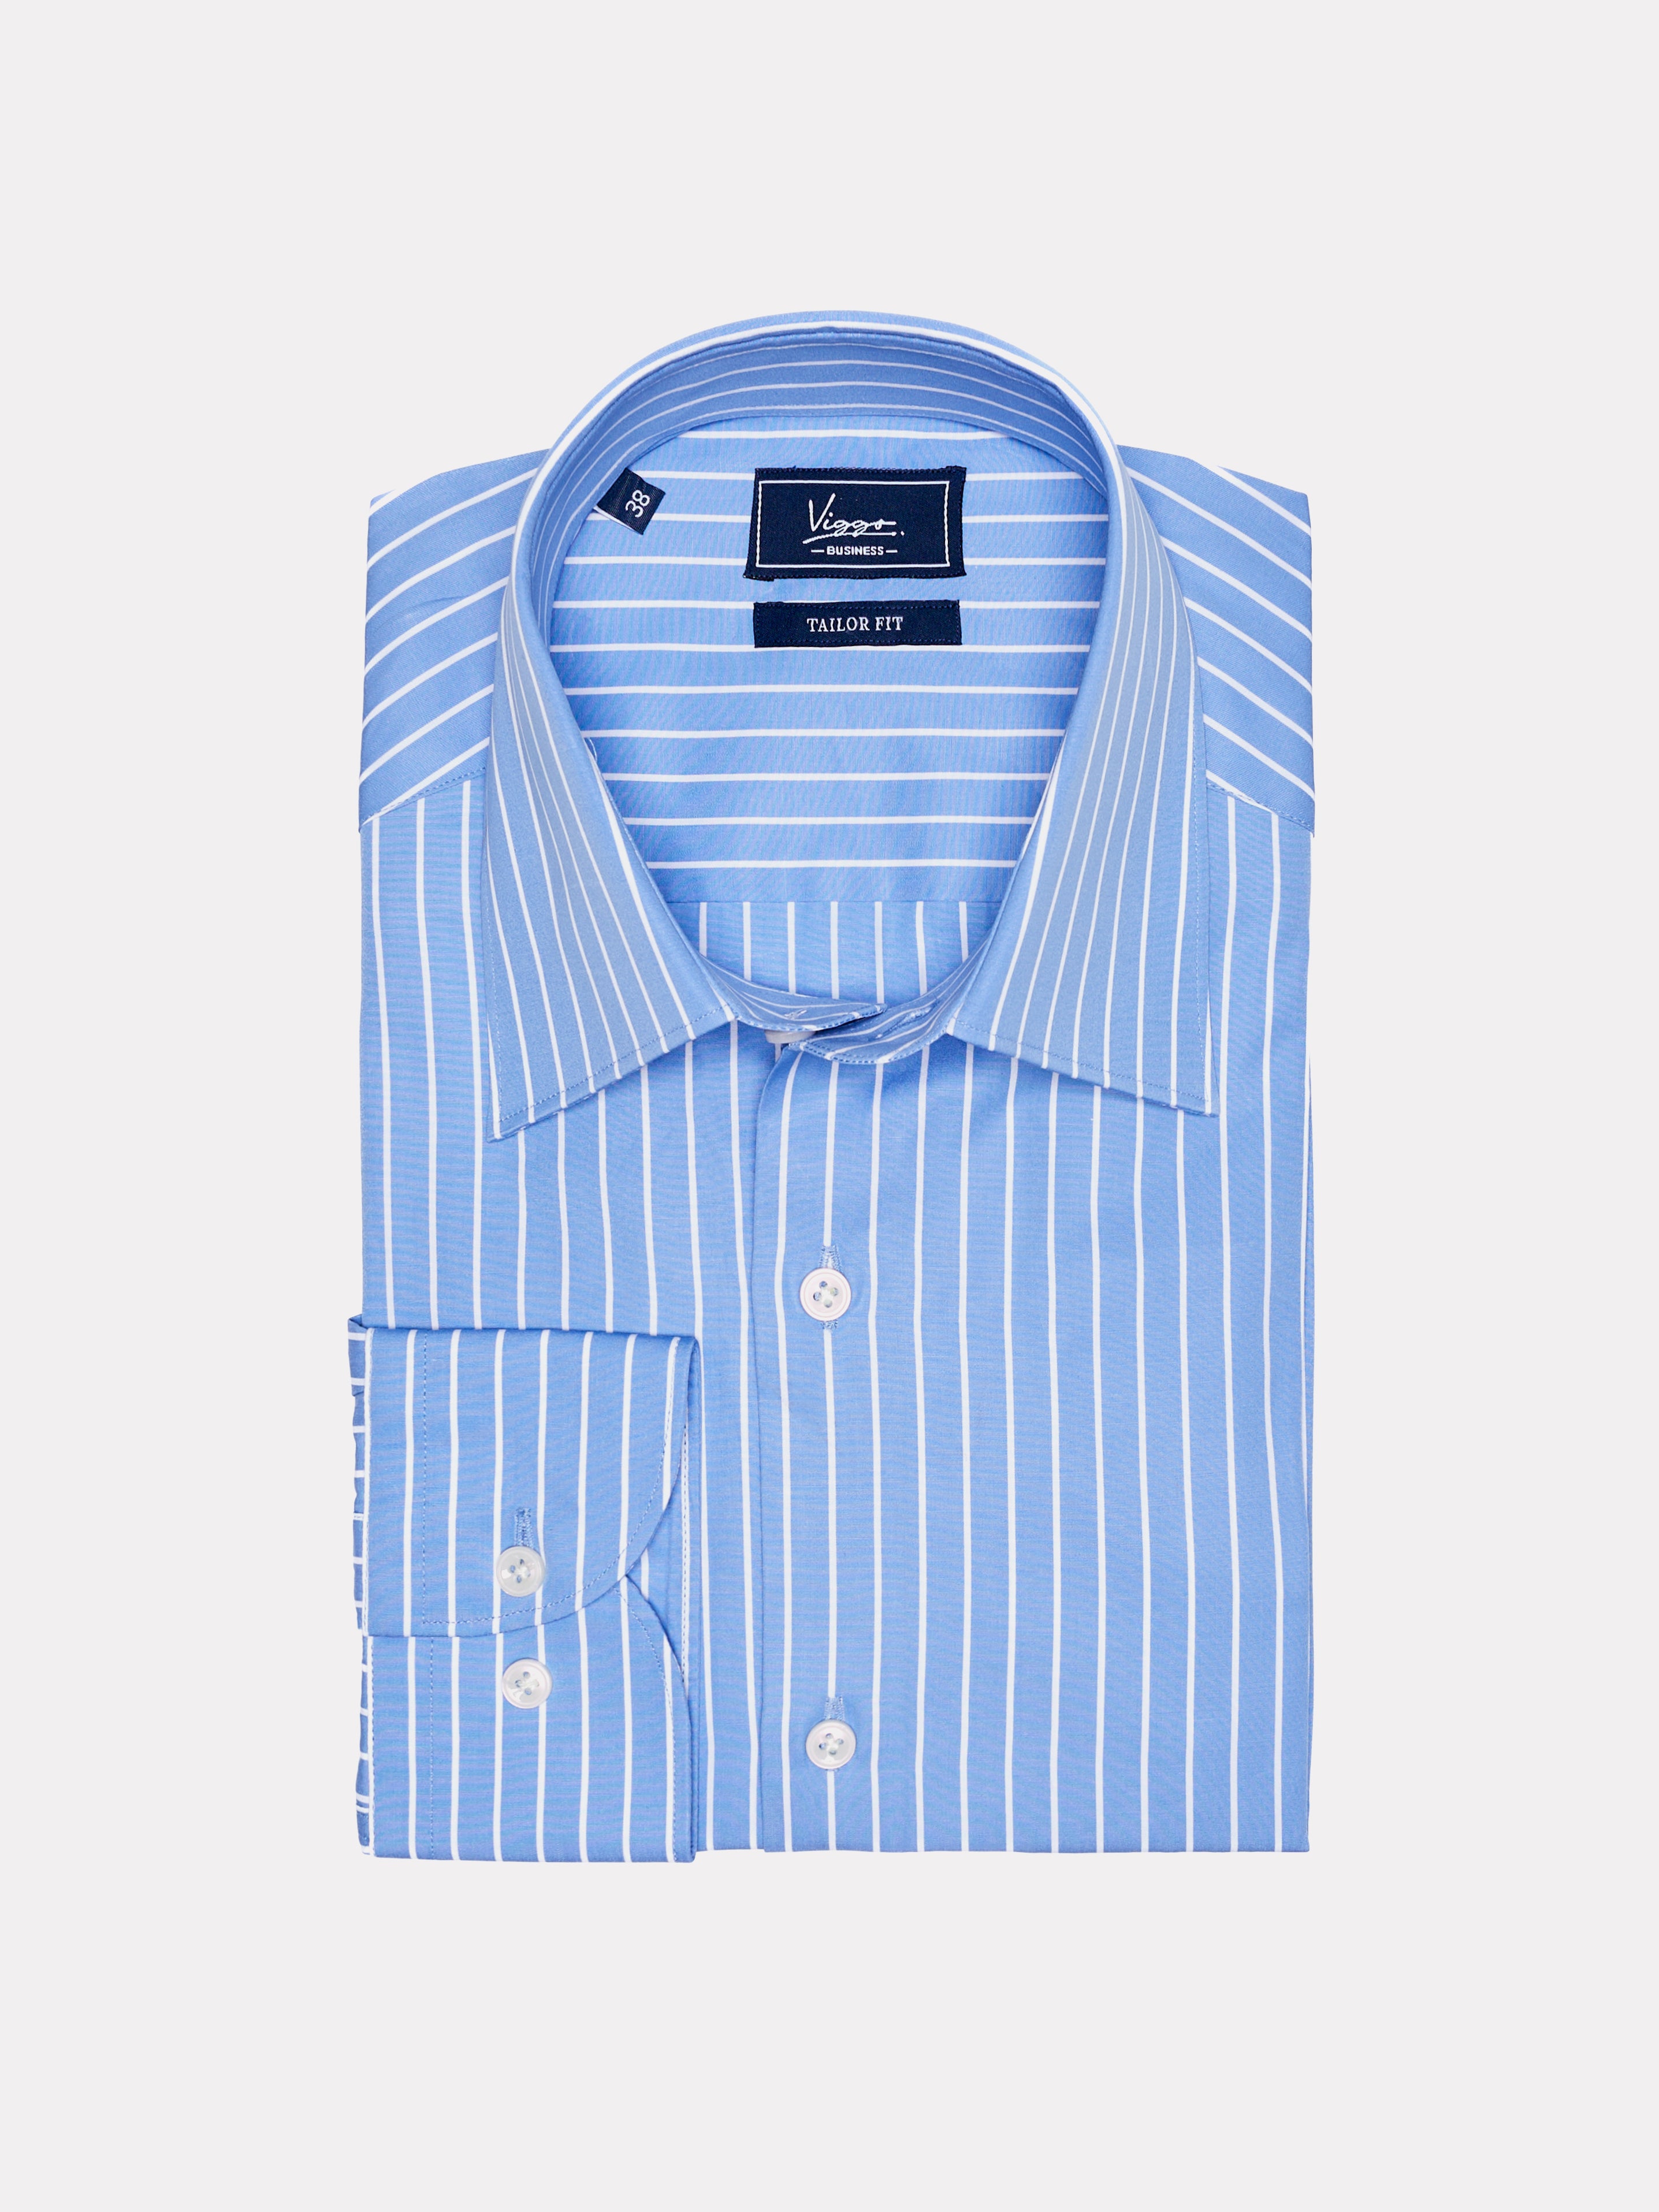 Blue shirt with white stripes